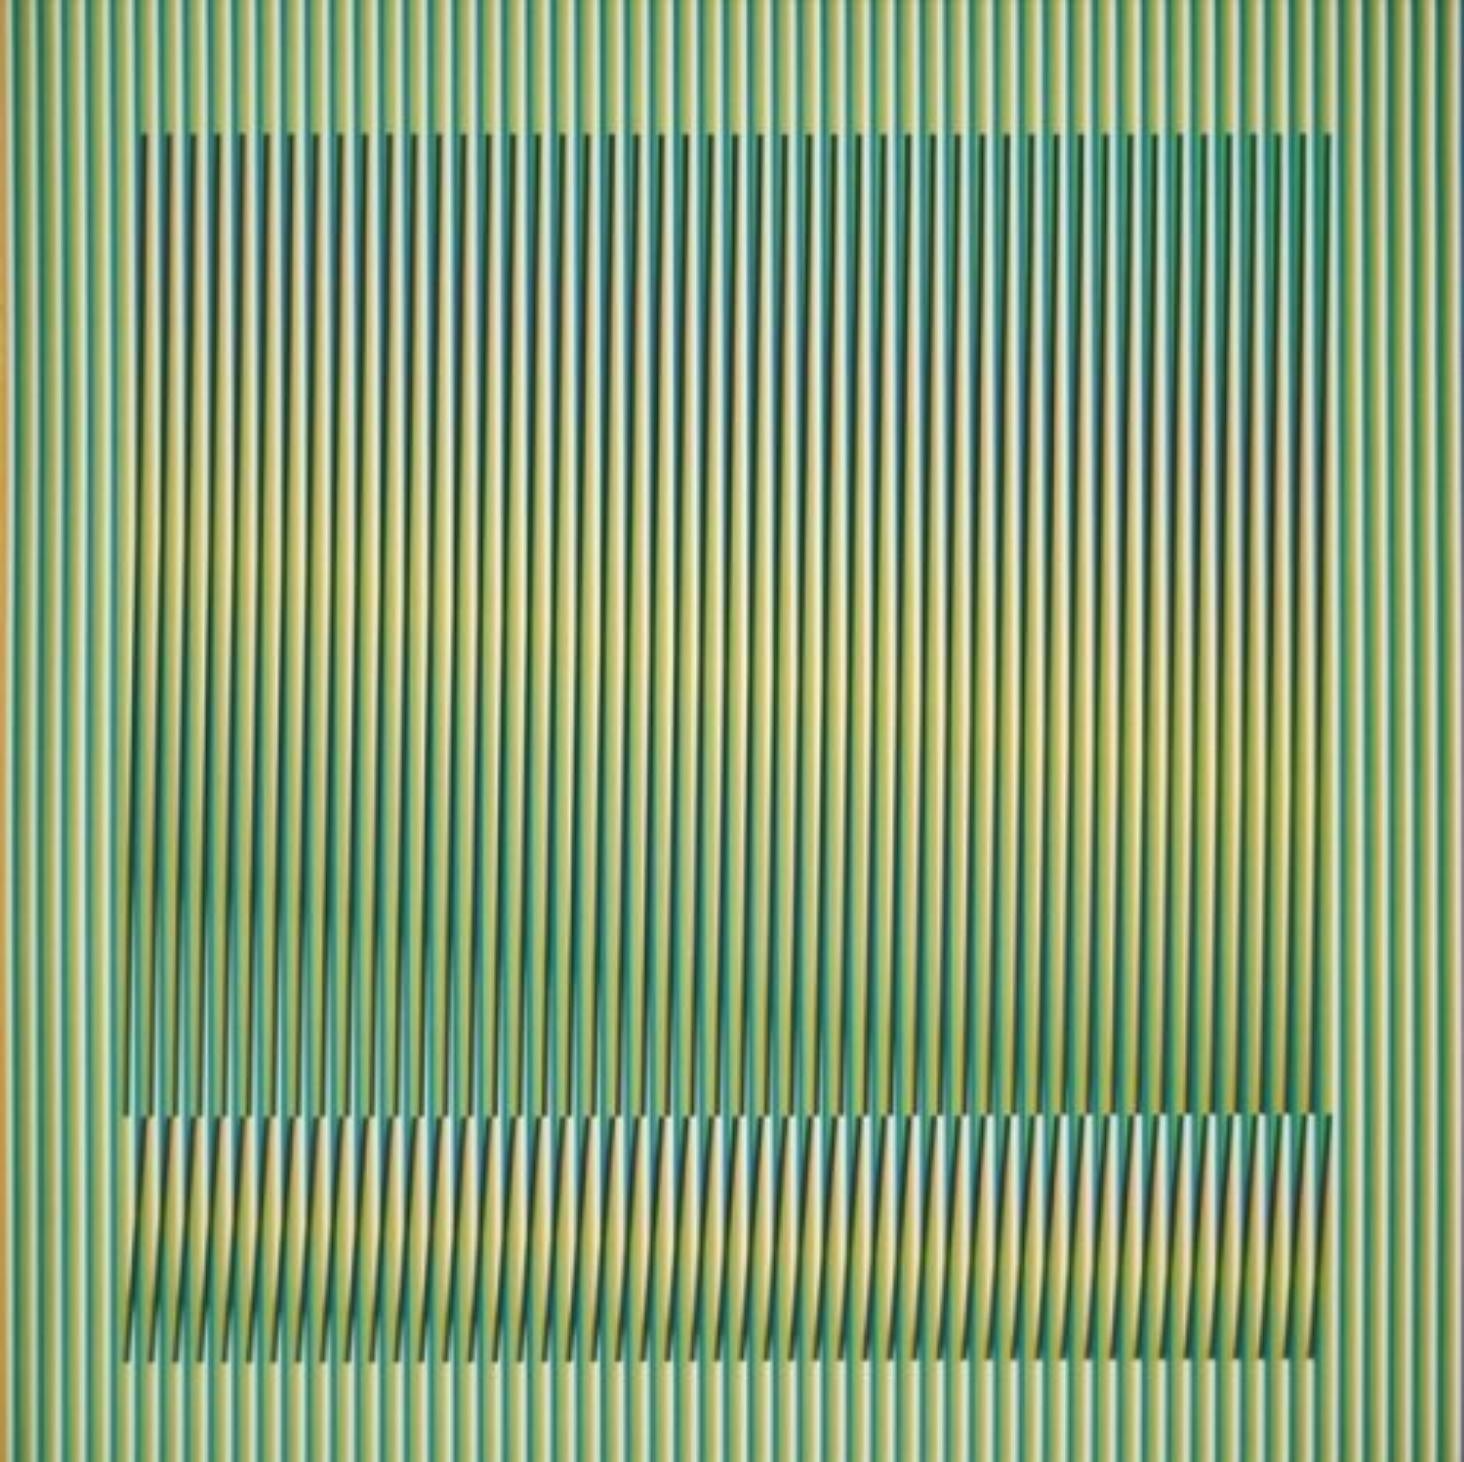 Induction Chromatique a Double Frequence - Mod. 2 - Print by Carlos Cruz-Diez